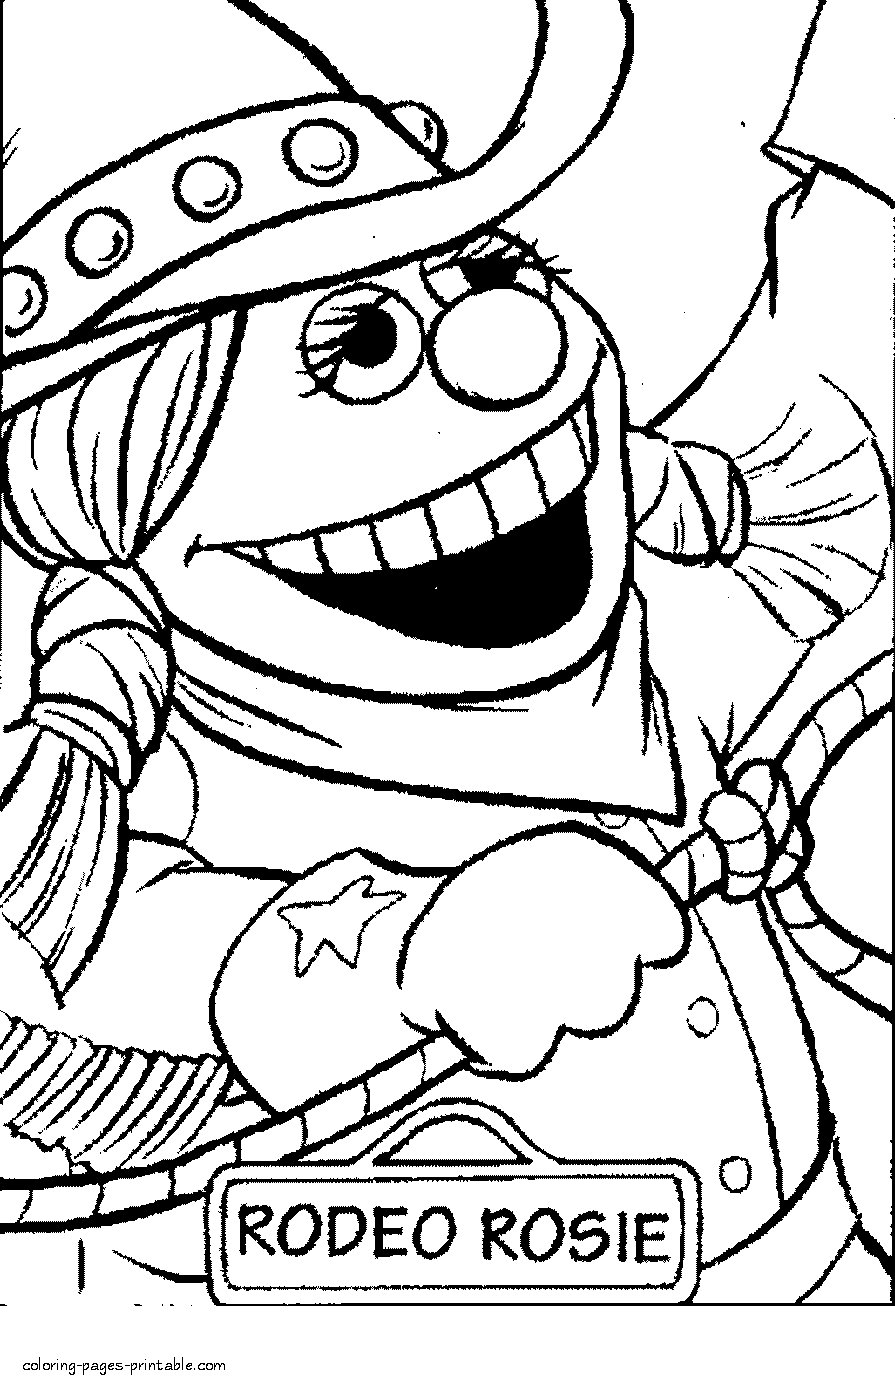 Free Sesame Street coloring pages for kids. Rodeo Rosie